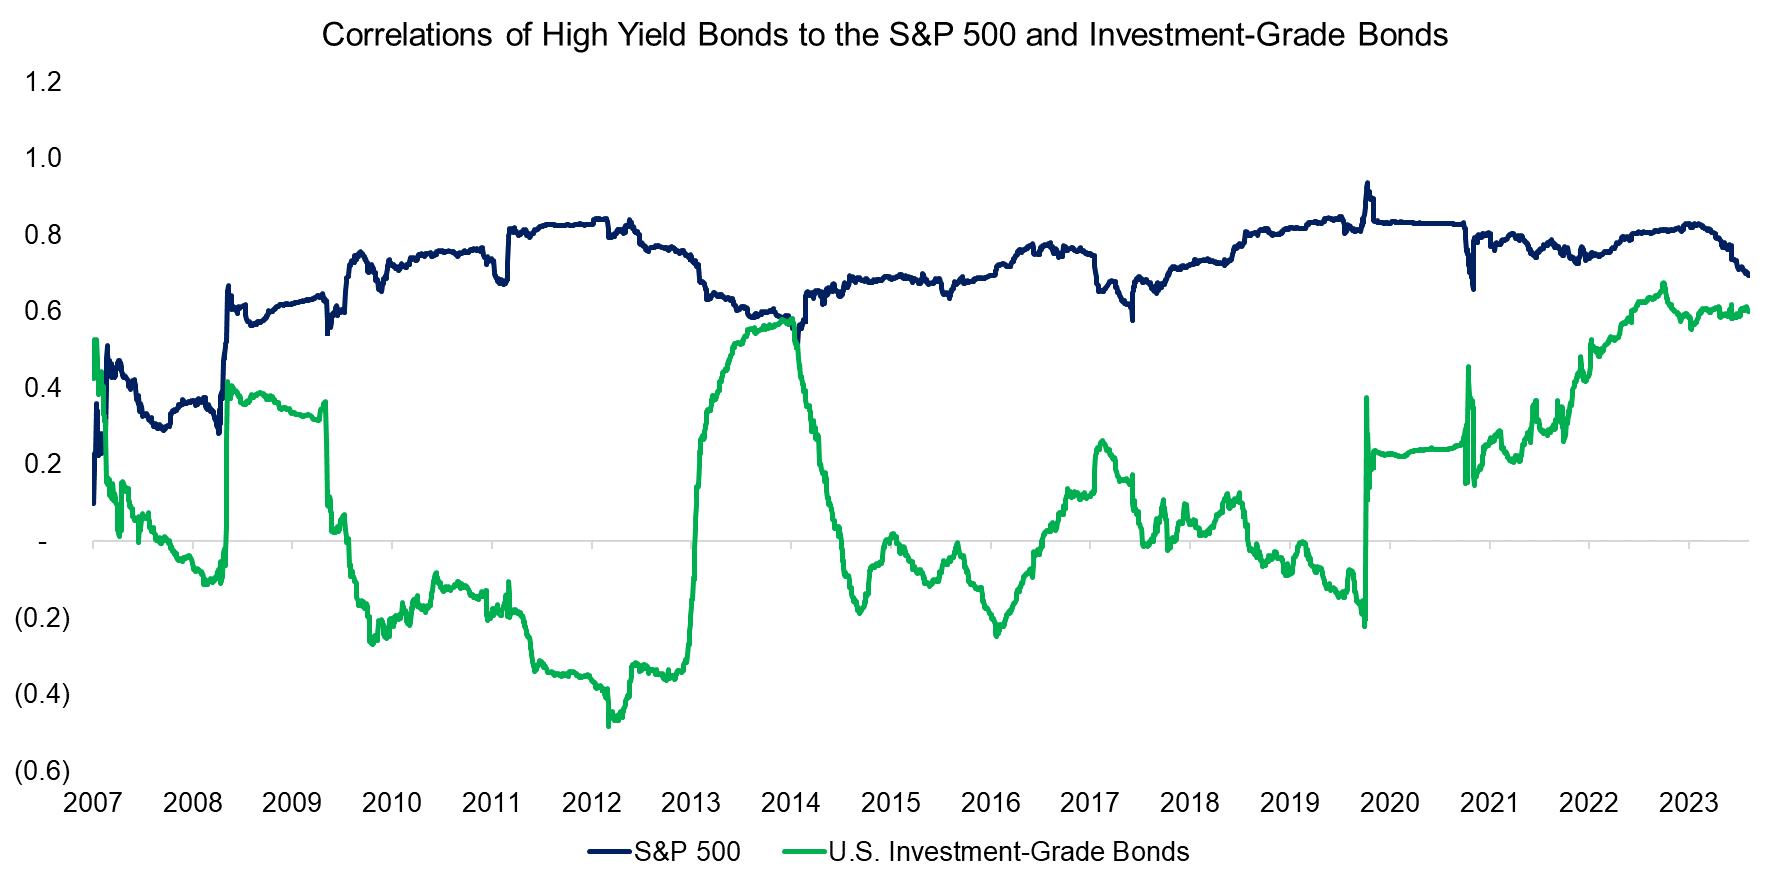 Correlations of High Yield Bonds to the S&P 500 and Investment-Grade Bonds